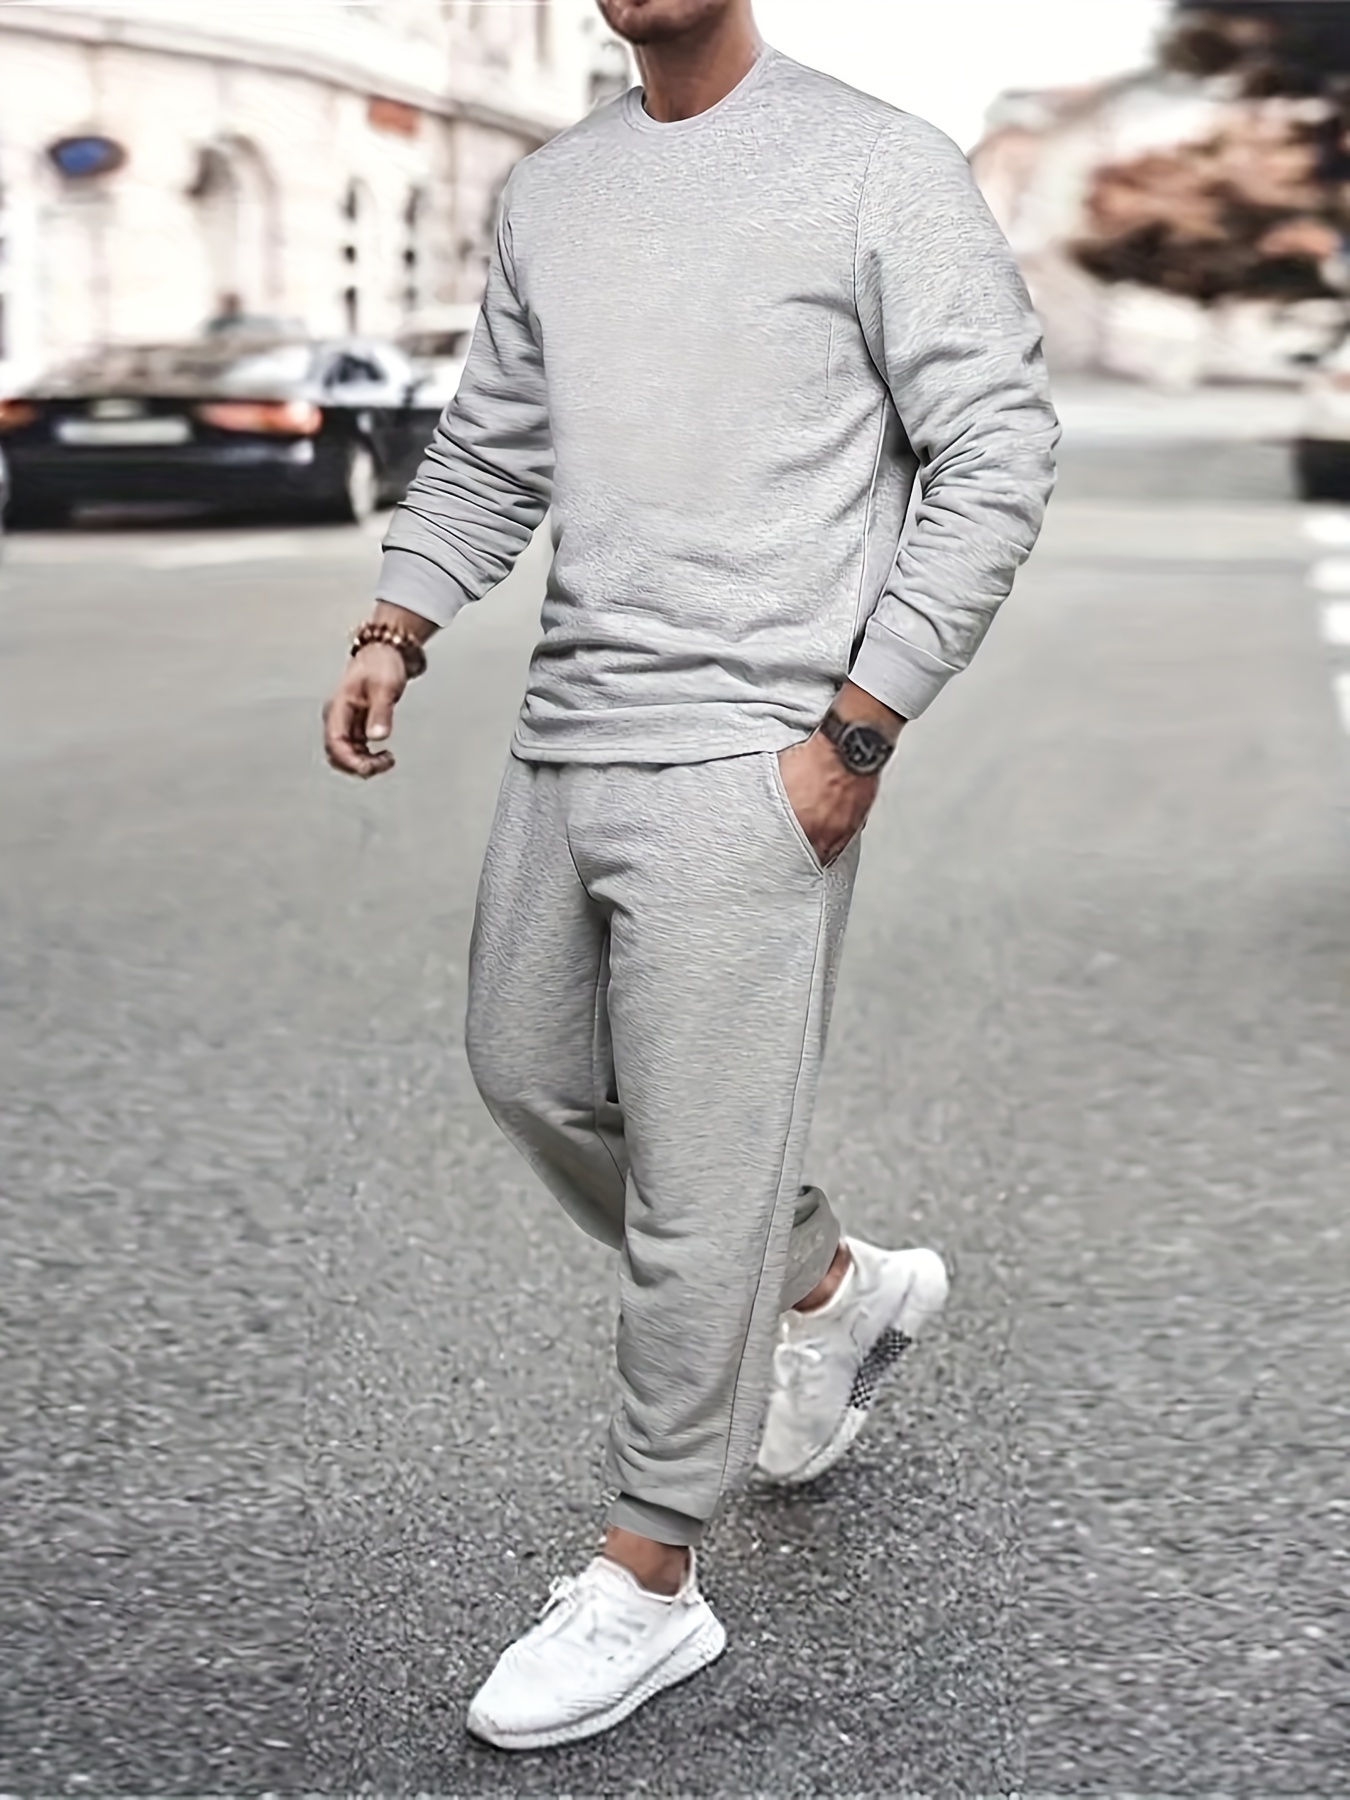 grey sweatpants  Cool outfits for men, Guys clothing styles, Pants outfit  men